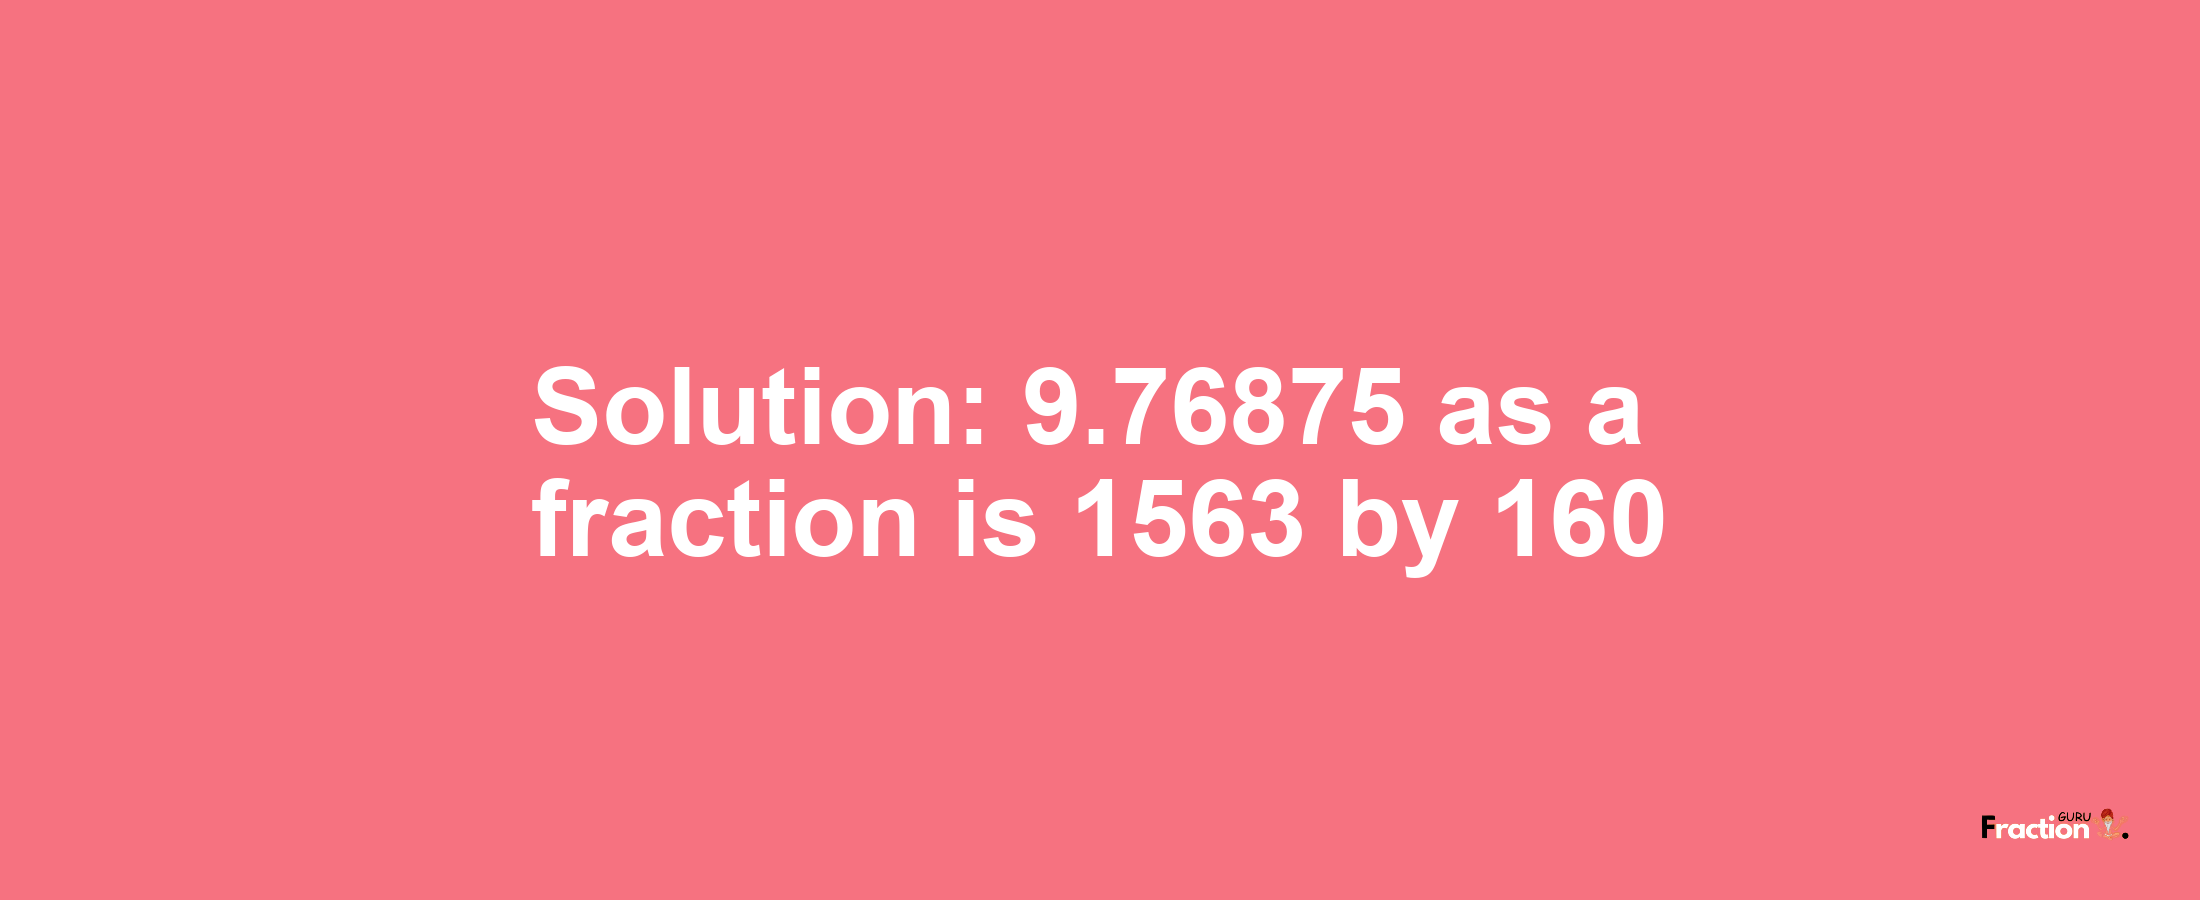 Solution:9.76875 as a fraction is 1563/160